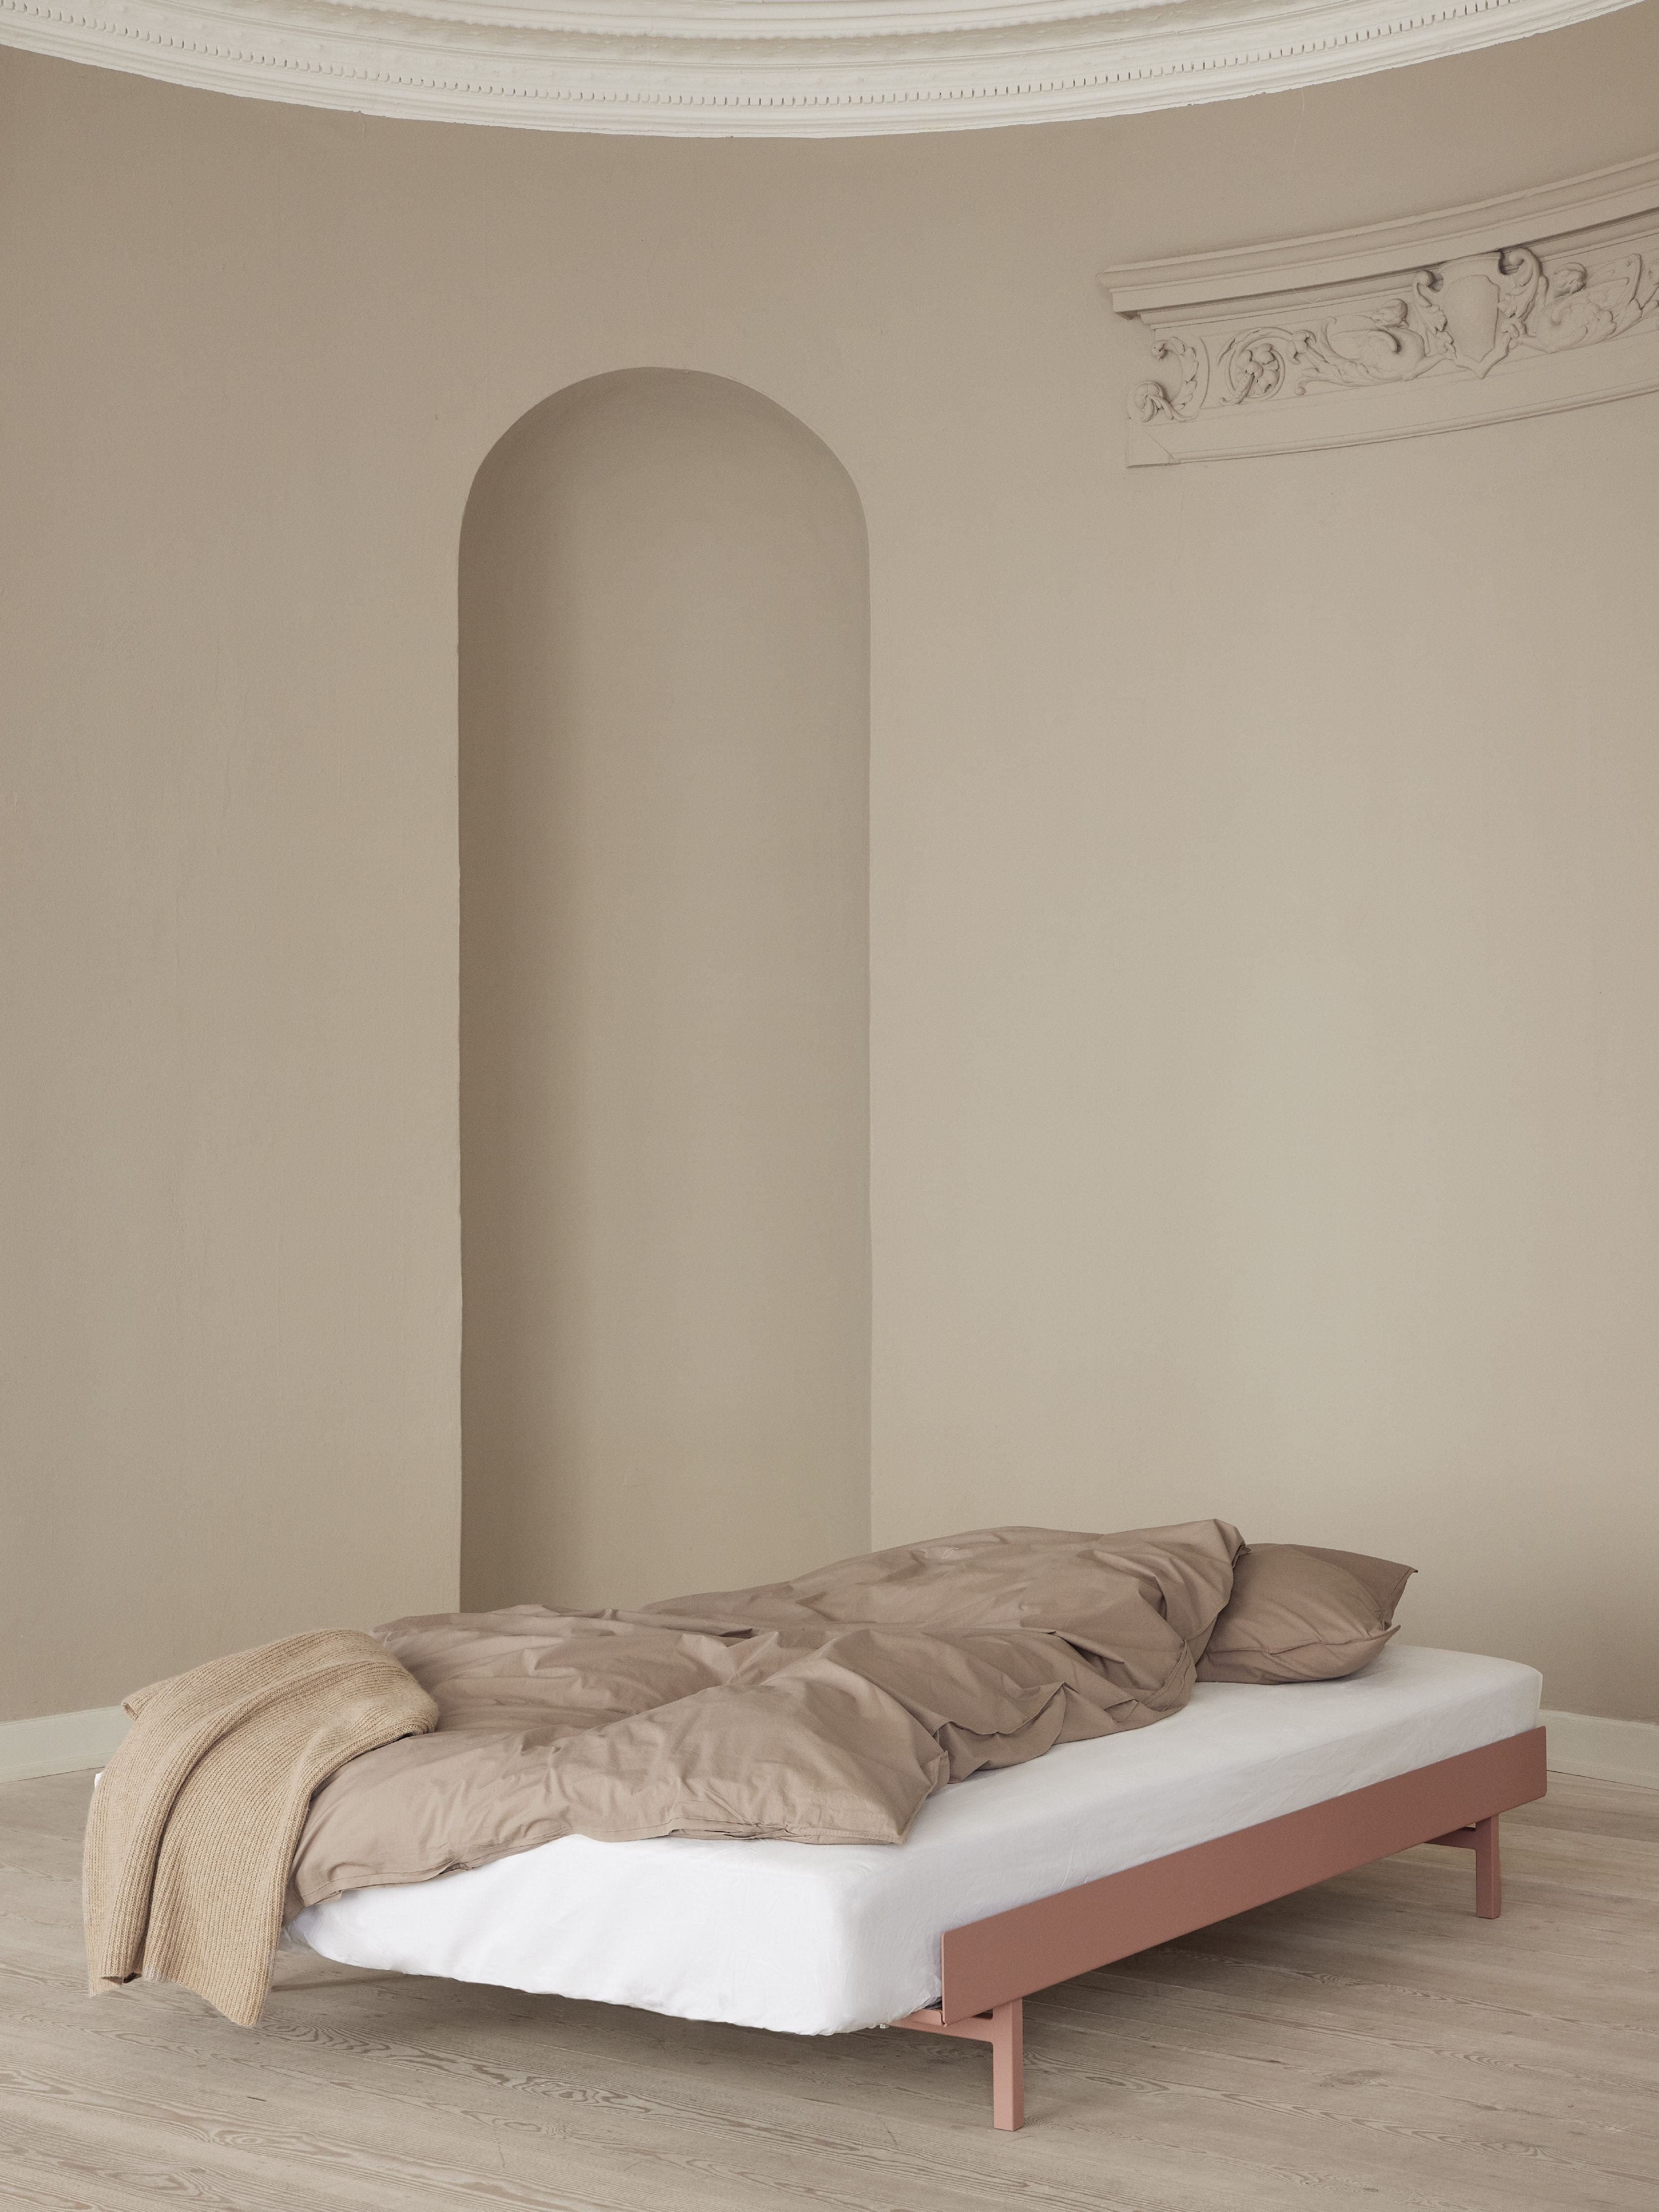 Moebe Bed With Bed Slats 160 Cm, Dusty Rose